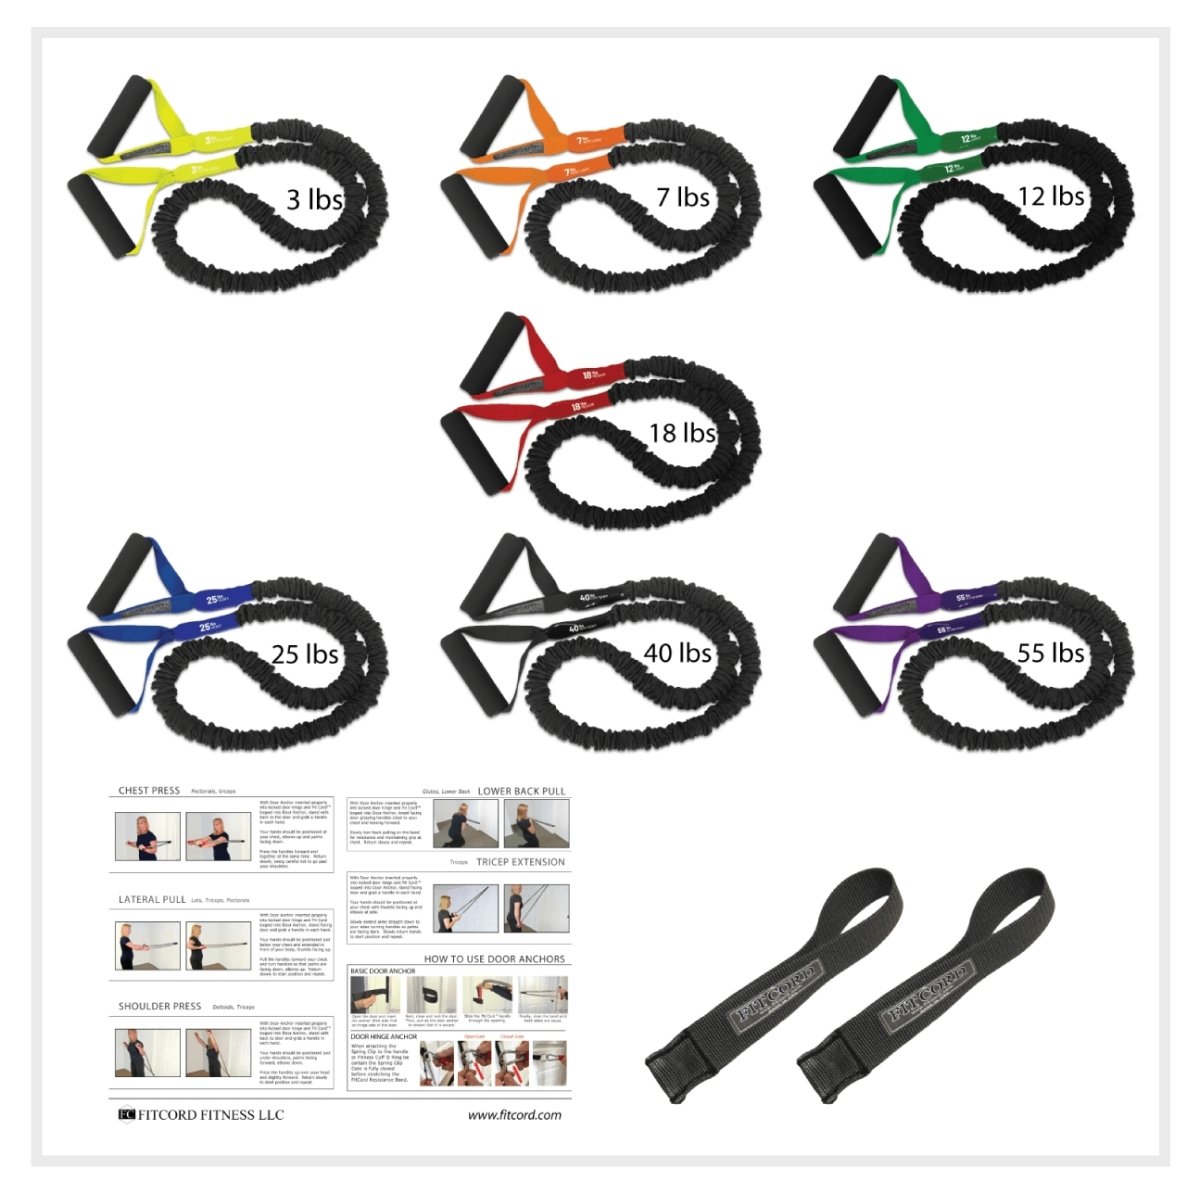 American made covered resistance band home gym for weight loss, fitness, mobility, and building muscle. Best Bands on the market. Covered for safety, easy to put away, portable exercise equipment. Safest and best quality home gym available today